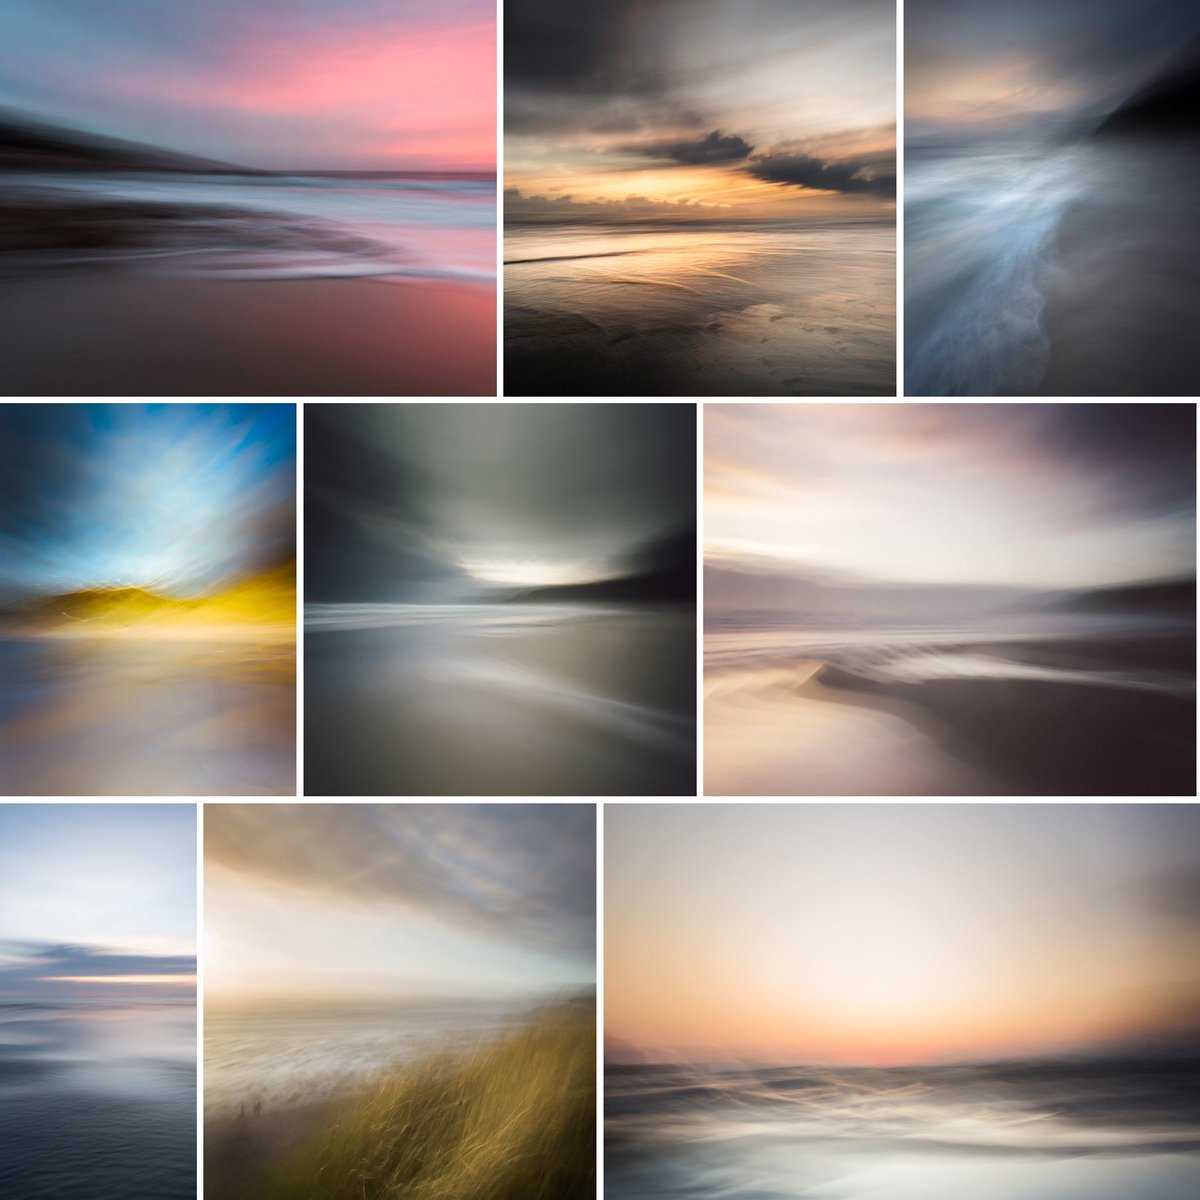 It’s been a seven year journey with my photography to get to this stage. Today I set off to West Wittering to co-host our first photography workshops. Photography has become my way of processing, coping and escaping, and I can’t wait to share my passion for ICM and the Coast 🌊🌊